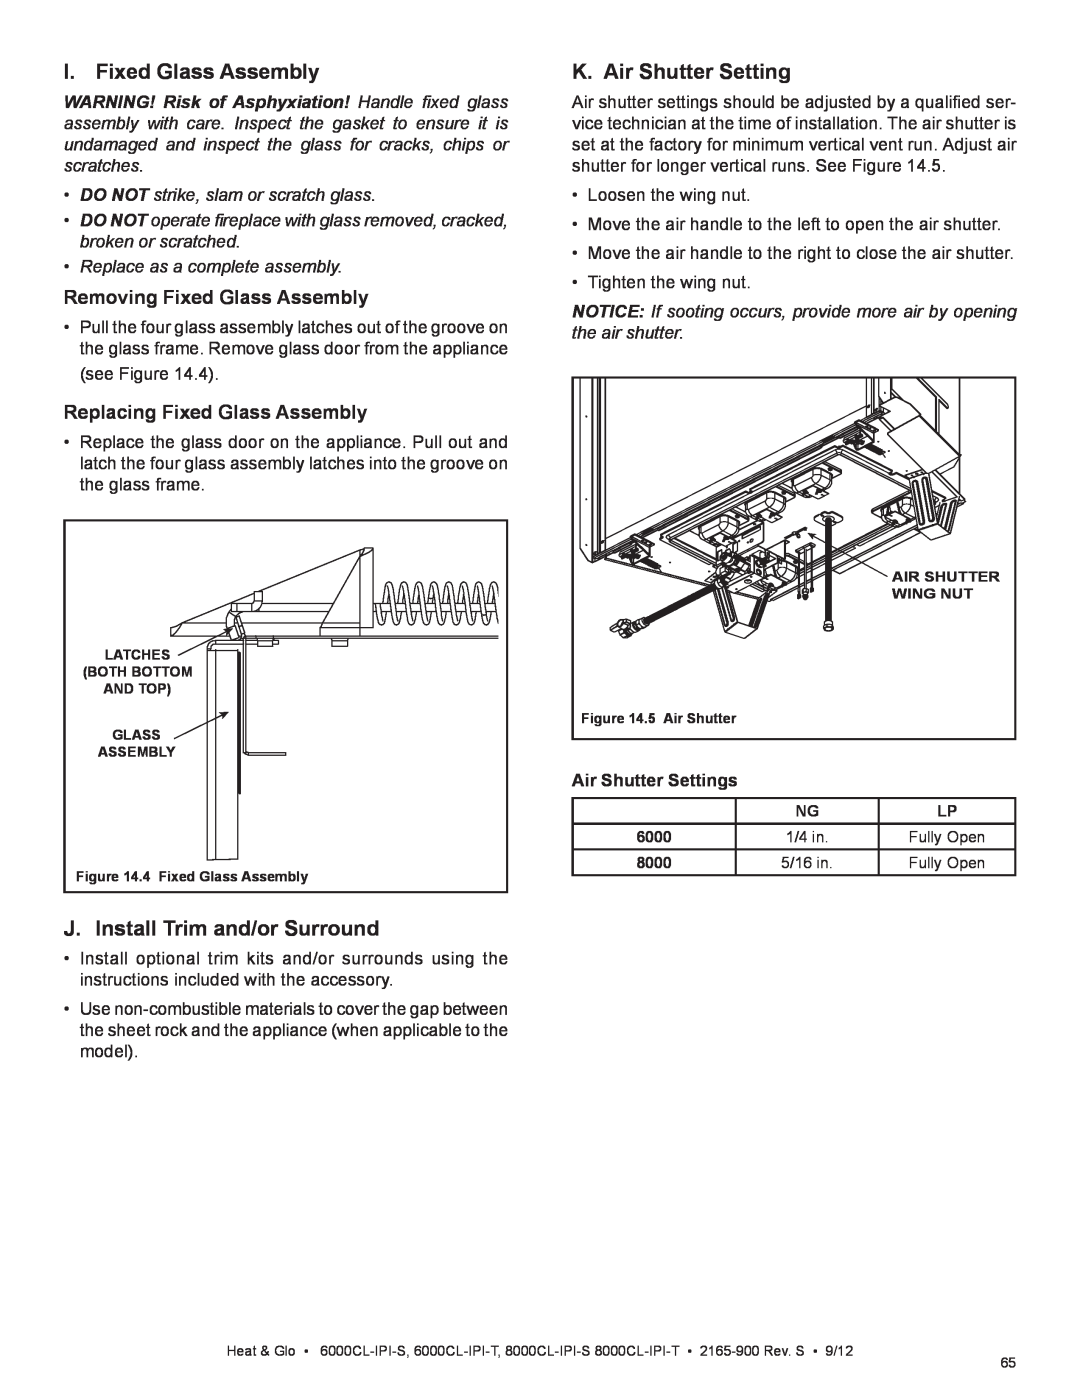 Heat & Glo LifeStyle 8000CL-IPI-T manual I. Fixed Glass Assembly, J. Install Trim and/or Surround, K. Air Shutter Setting 